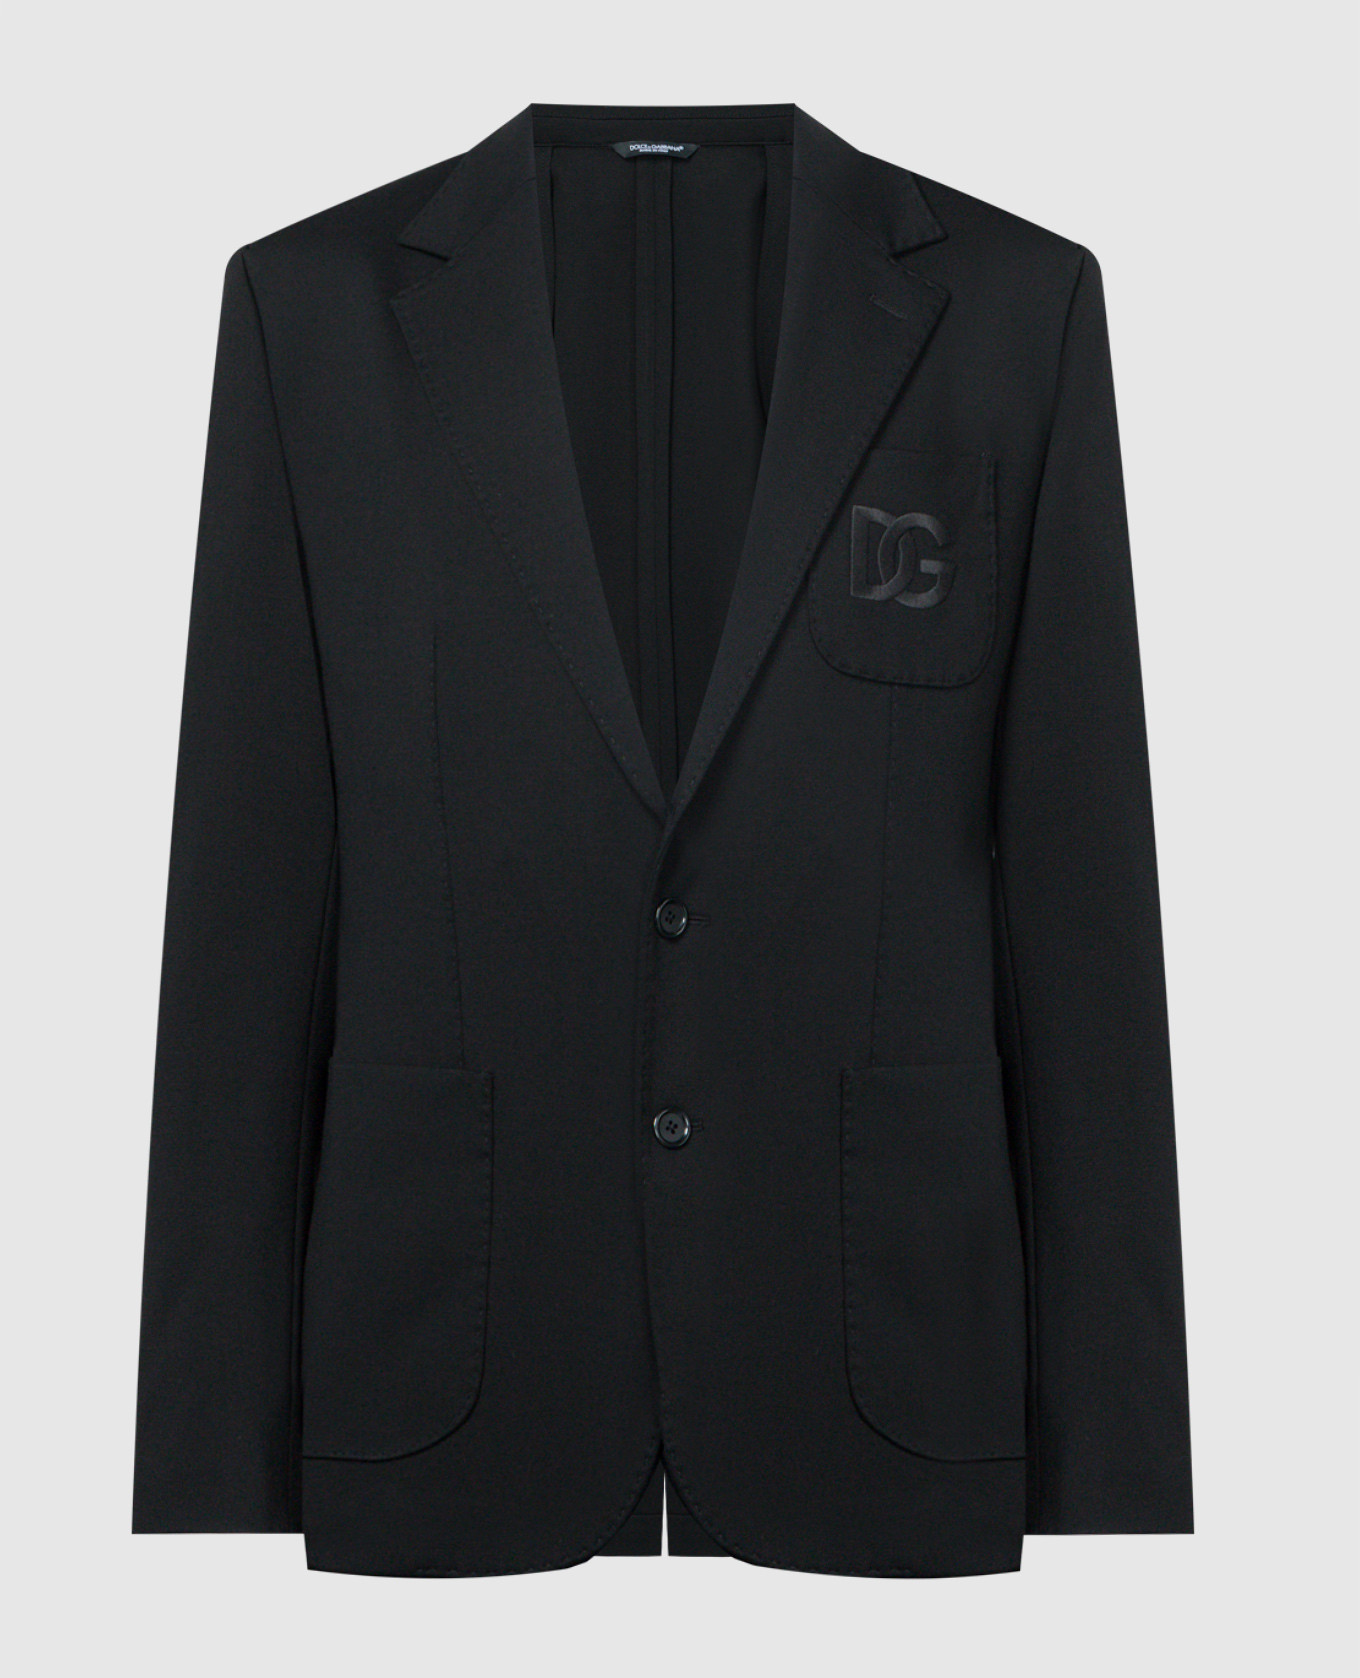 Black jacket with DG logo embroidery